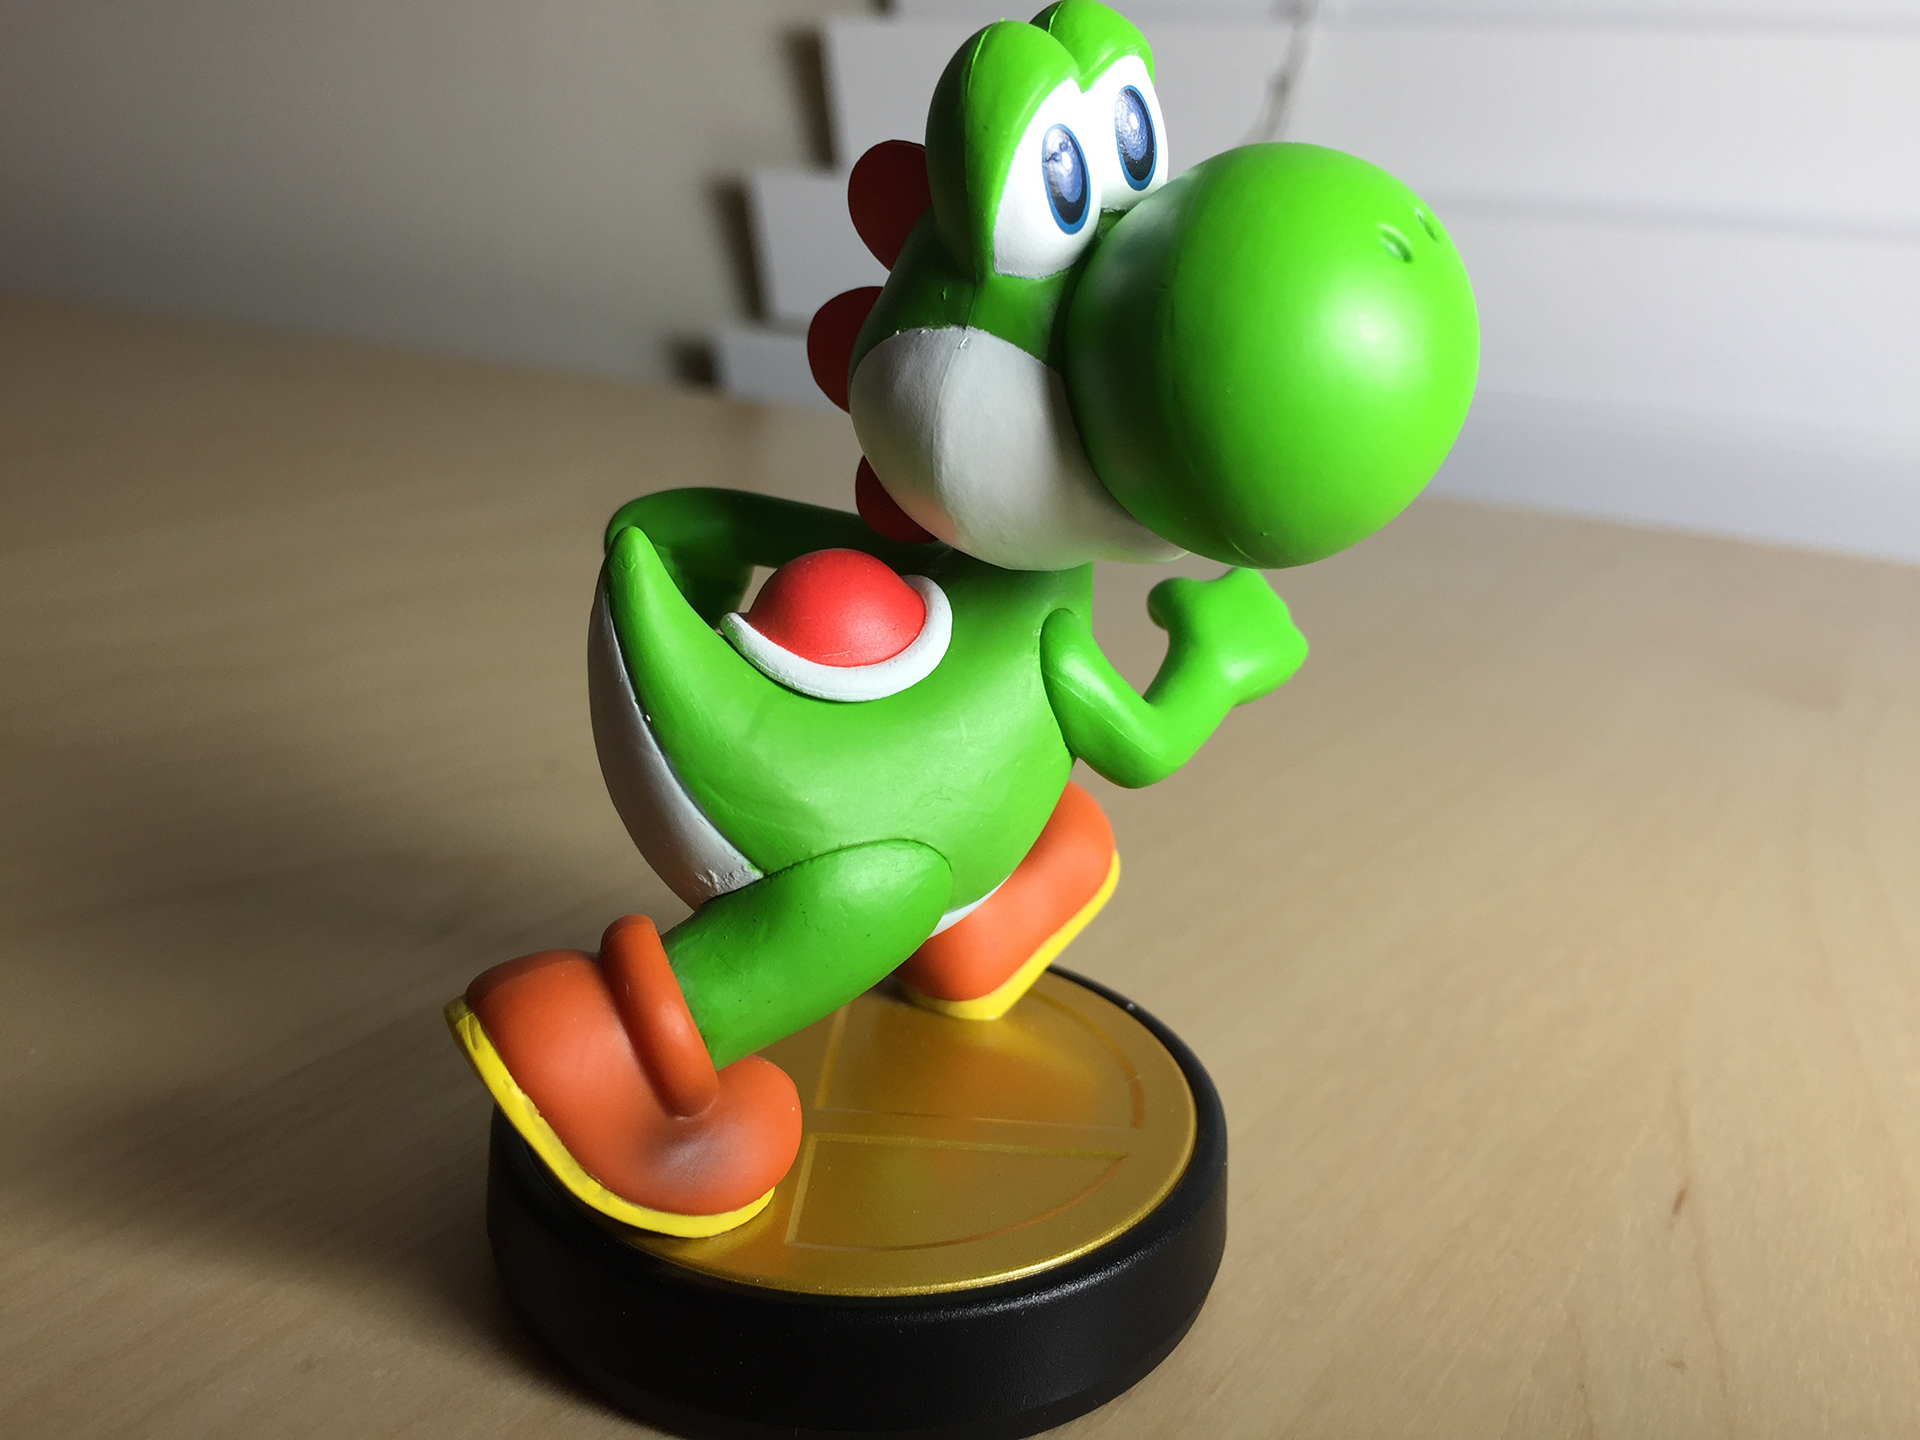 Up Close And Personal With Nintendo’s Amiibo Figures